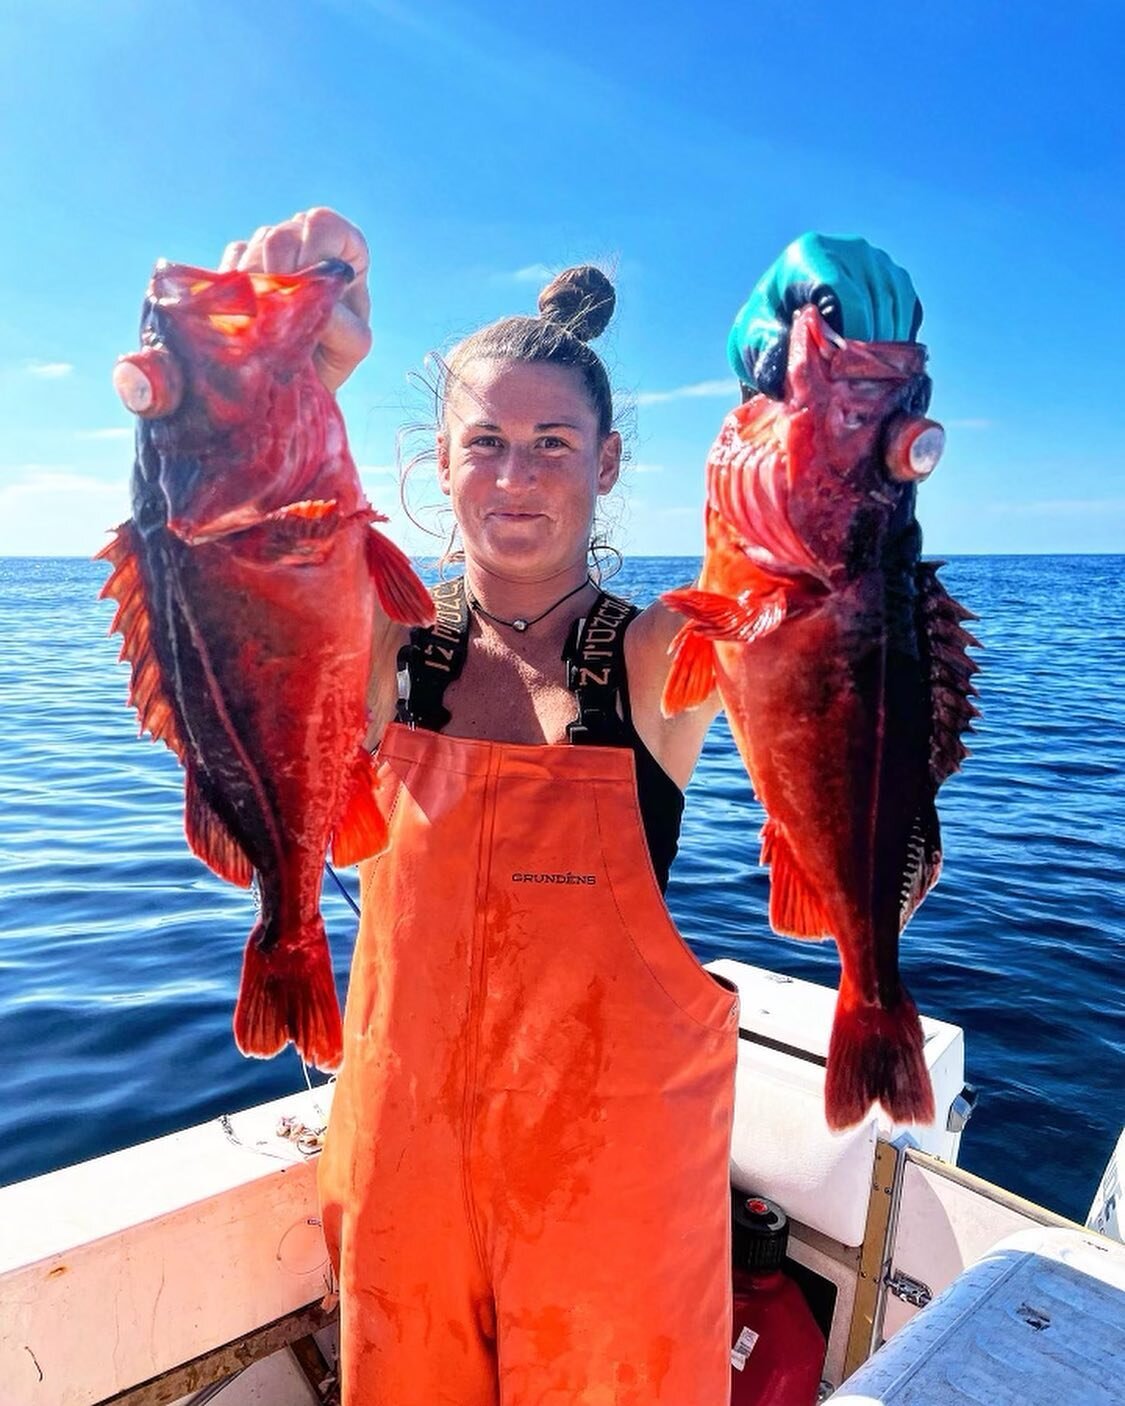 New crew alert! Chloe came to us recently and has helped take Paramount to the next level with her ocean knowledge, hard work and positive attitude. Welcome Chloe!!! 

Chloe Vetterli was born and raised in Santa Cruz, California to a family who nurtu